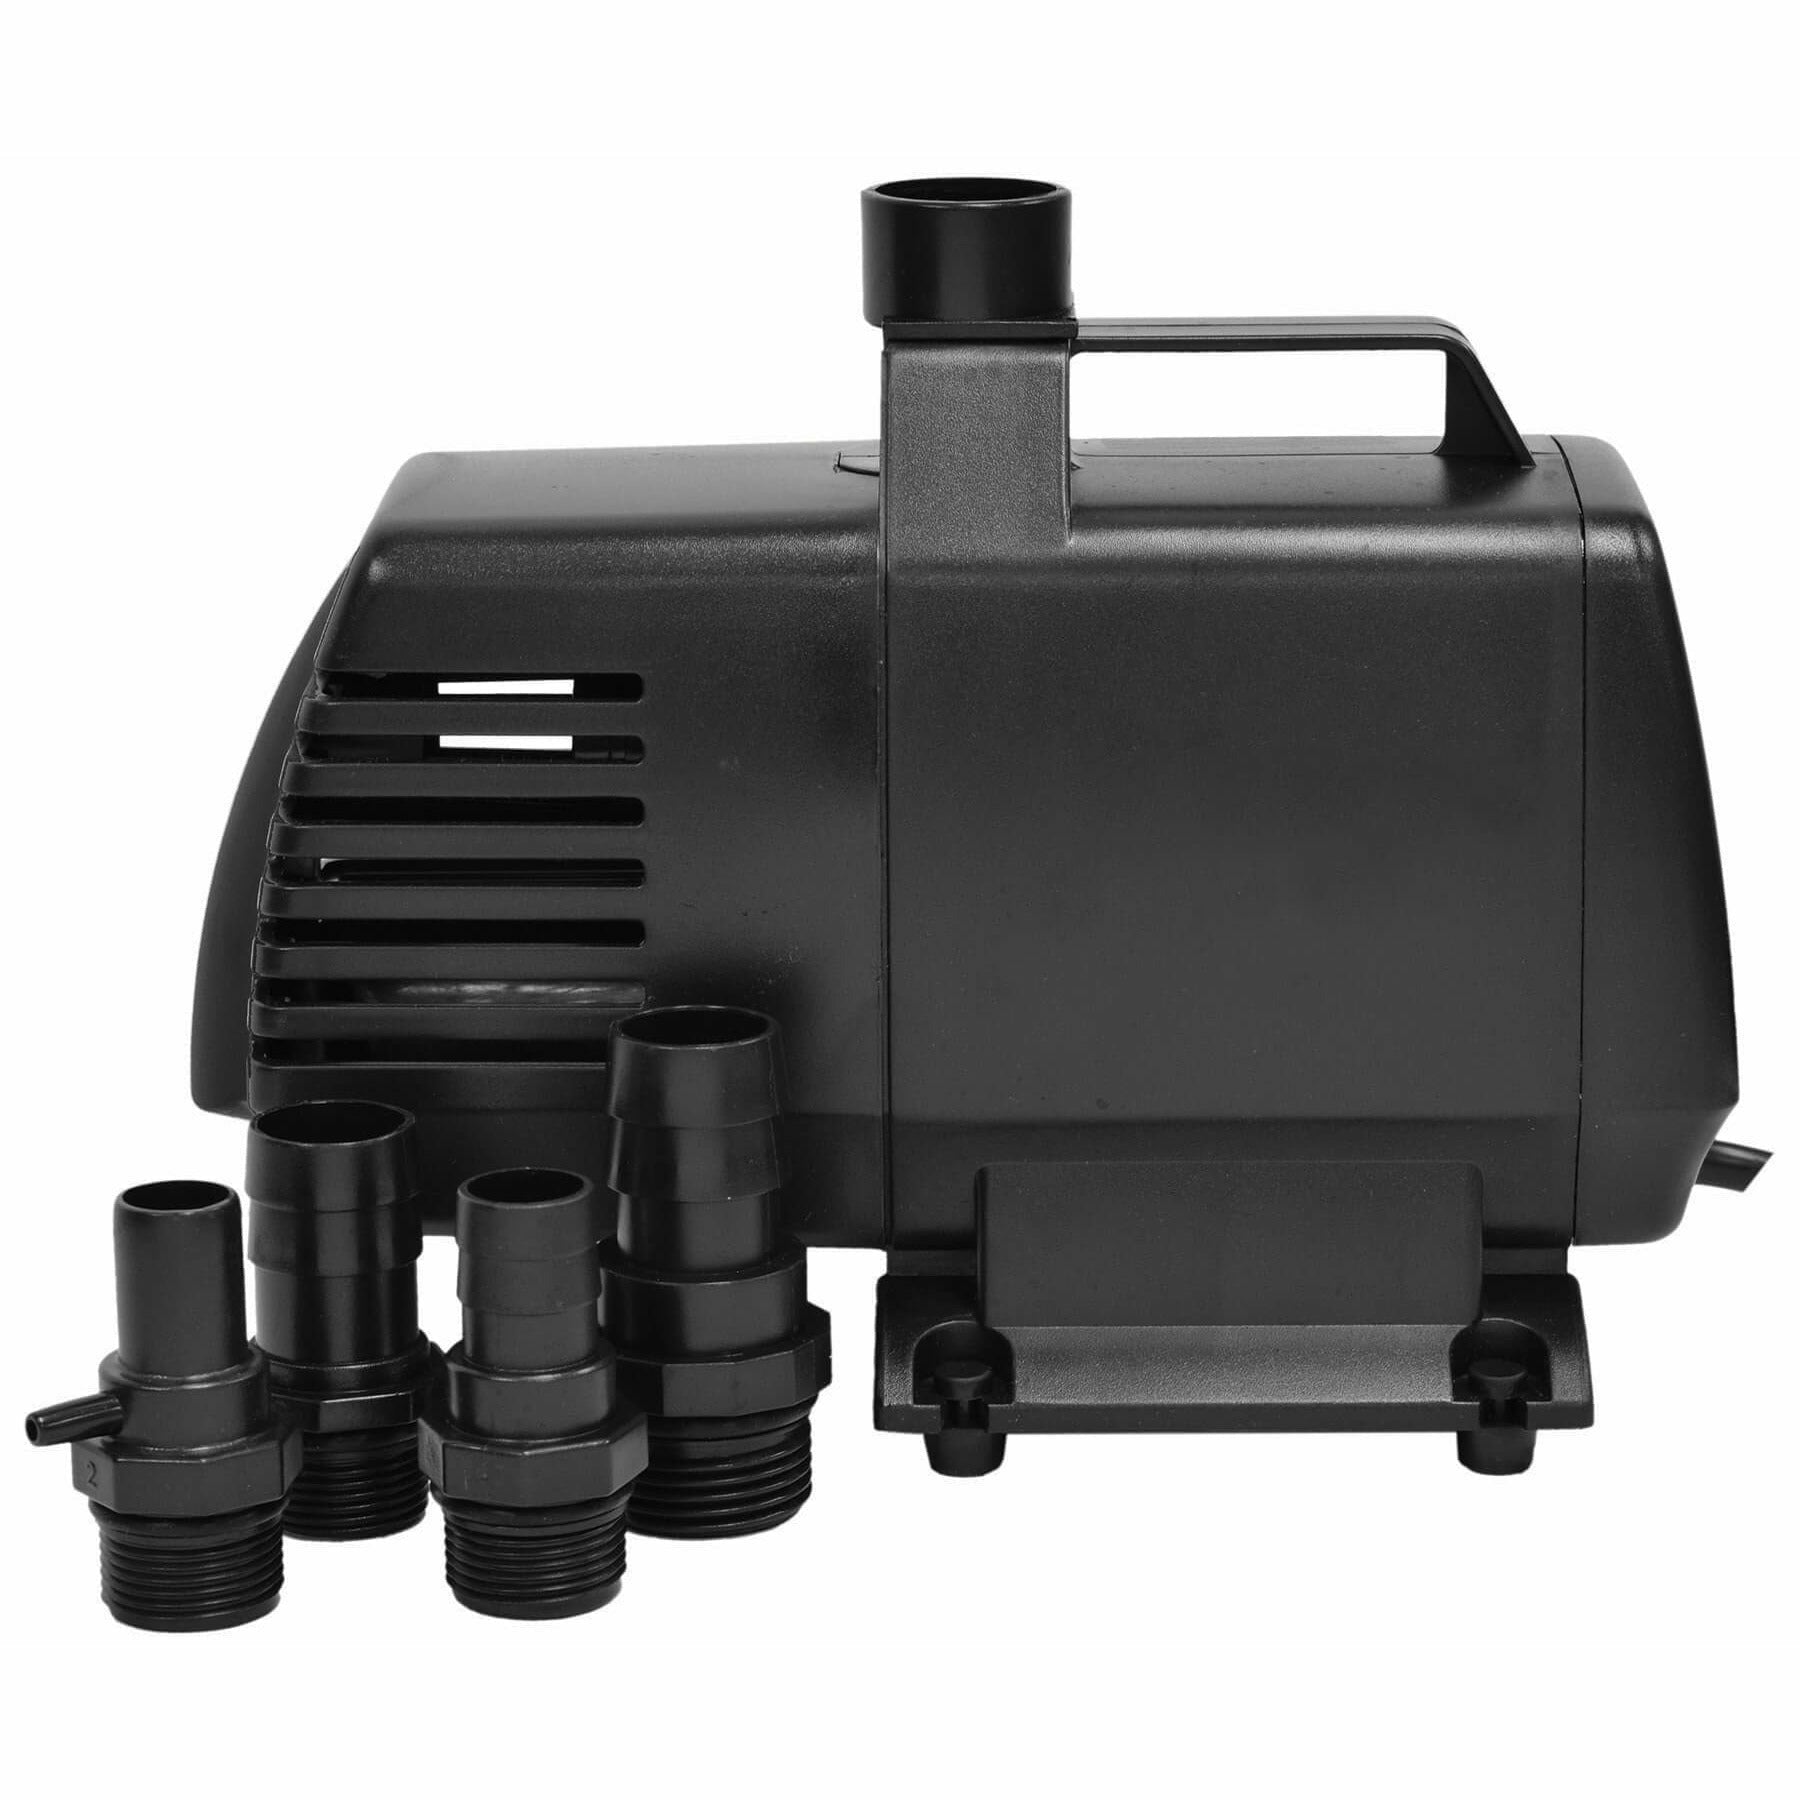 Efficient and Quiet Submersible Mag Drive Pump - 1750 GPH | EasyPro Pumps - American Pond Supplies Easy Pro Mag Drive Pumps Mag Drive Pumps